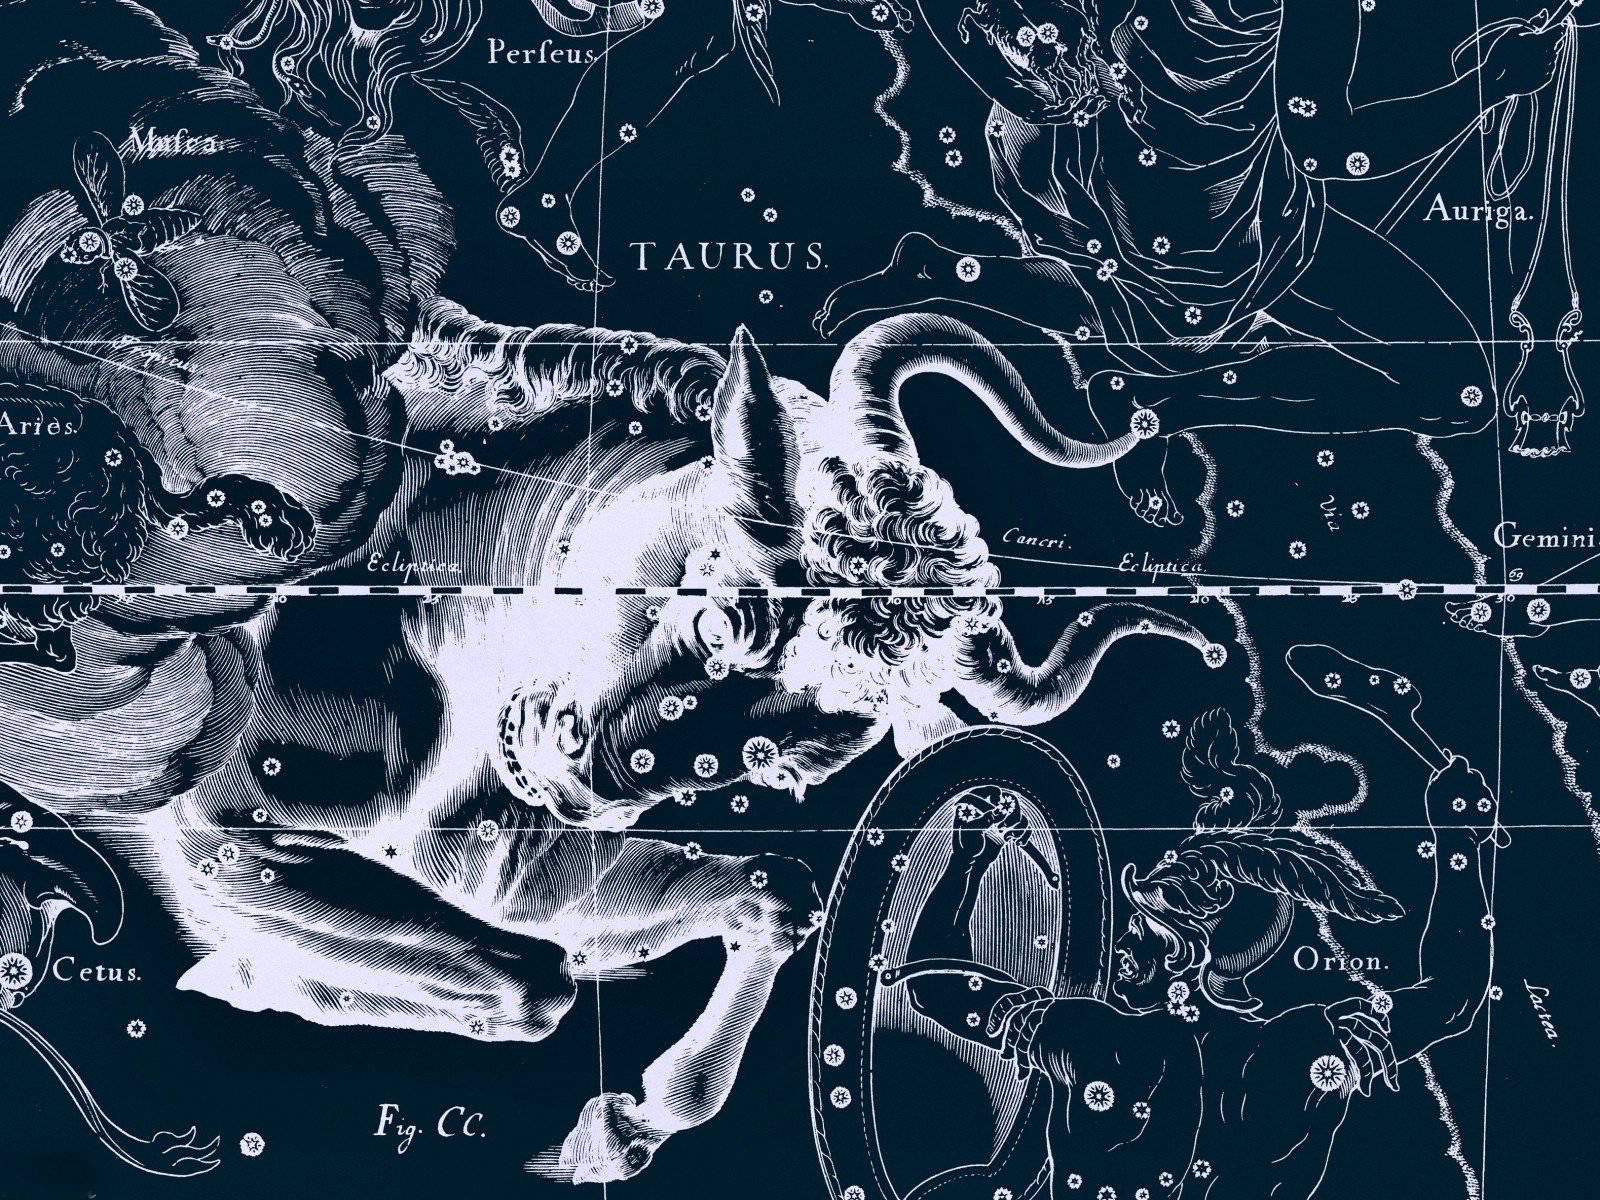 Embrace the Taurus energy with this stunning aesthetic imagery. Wallpaper